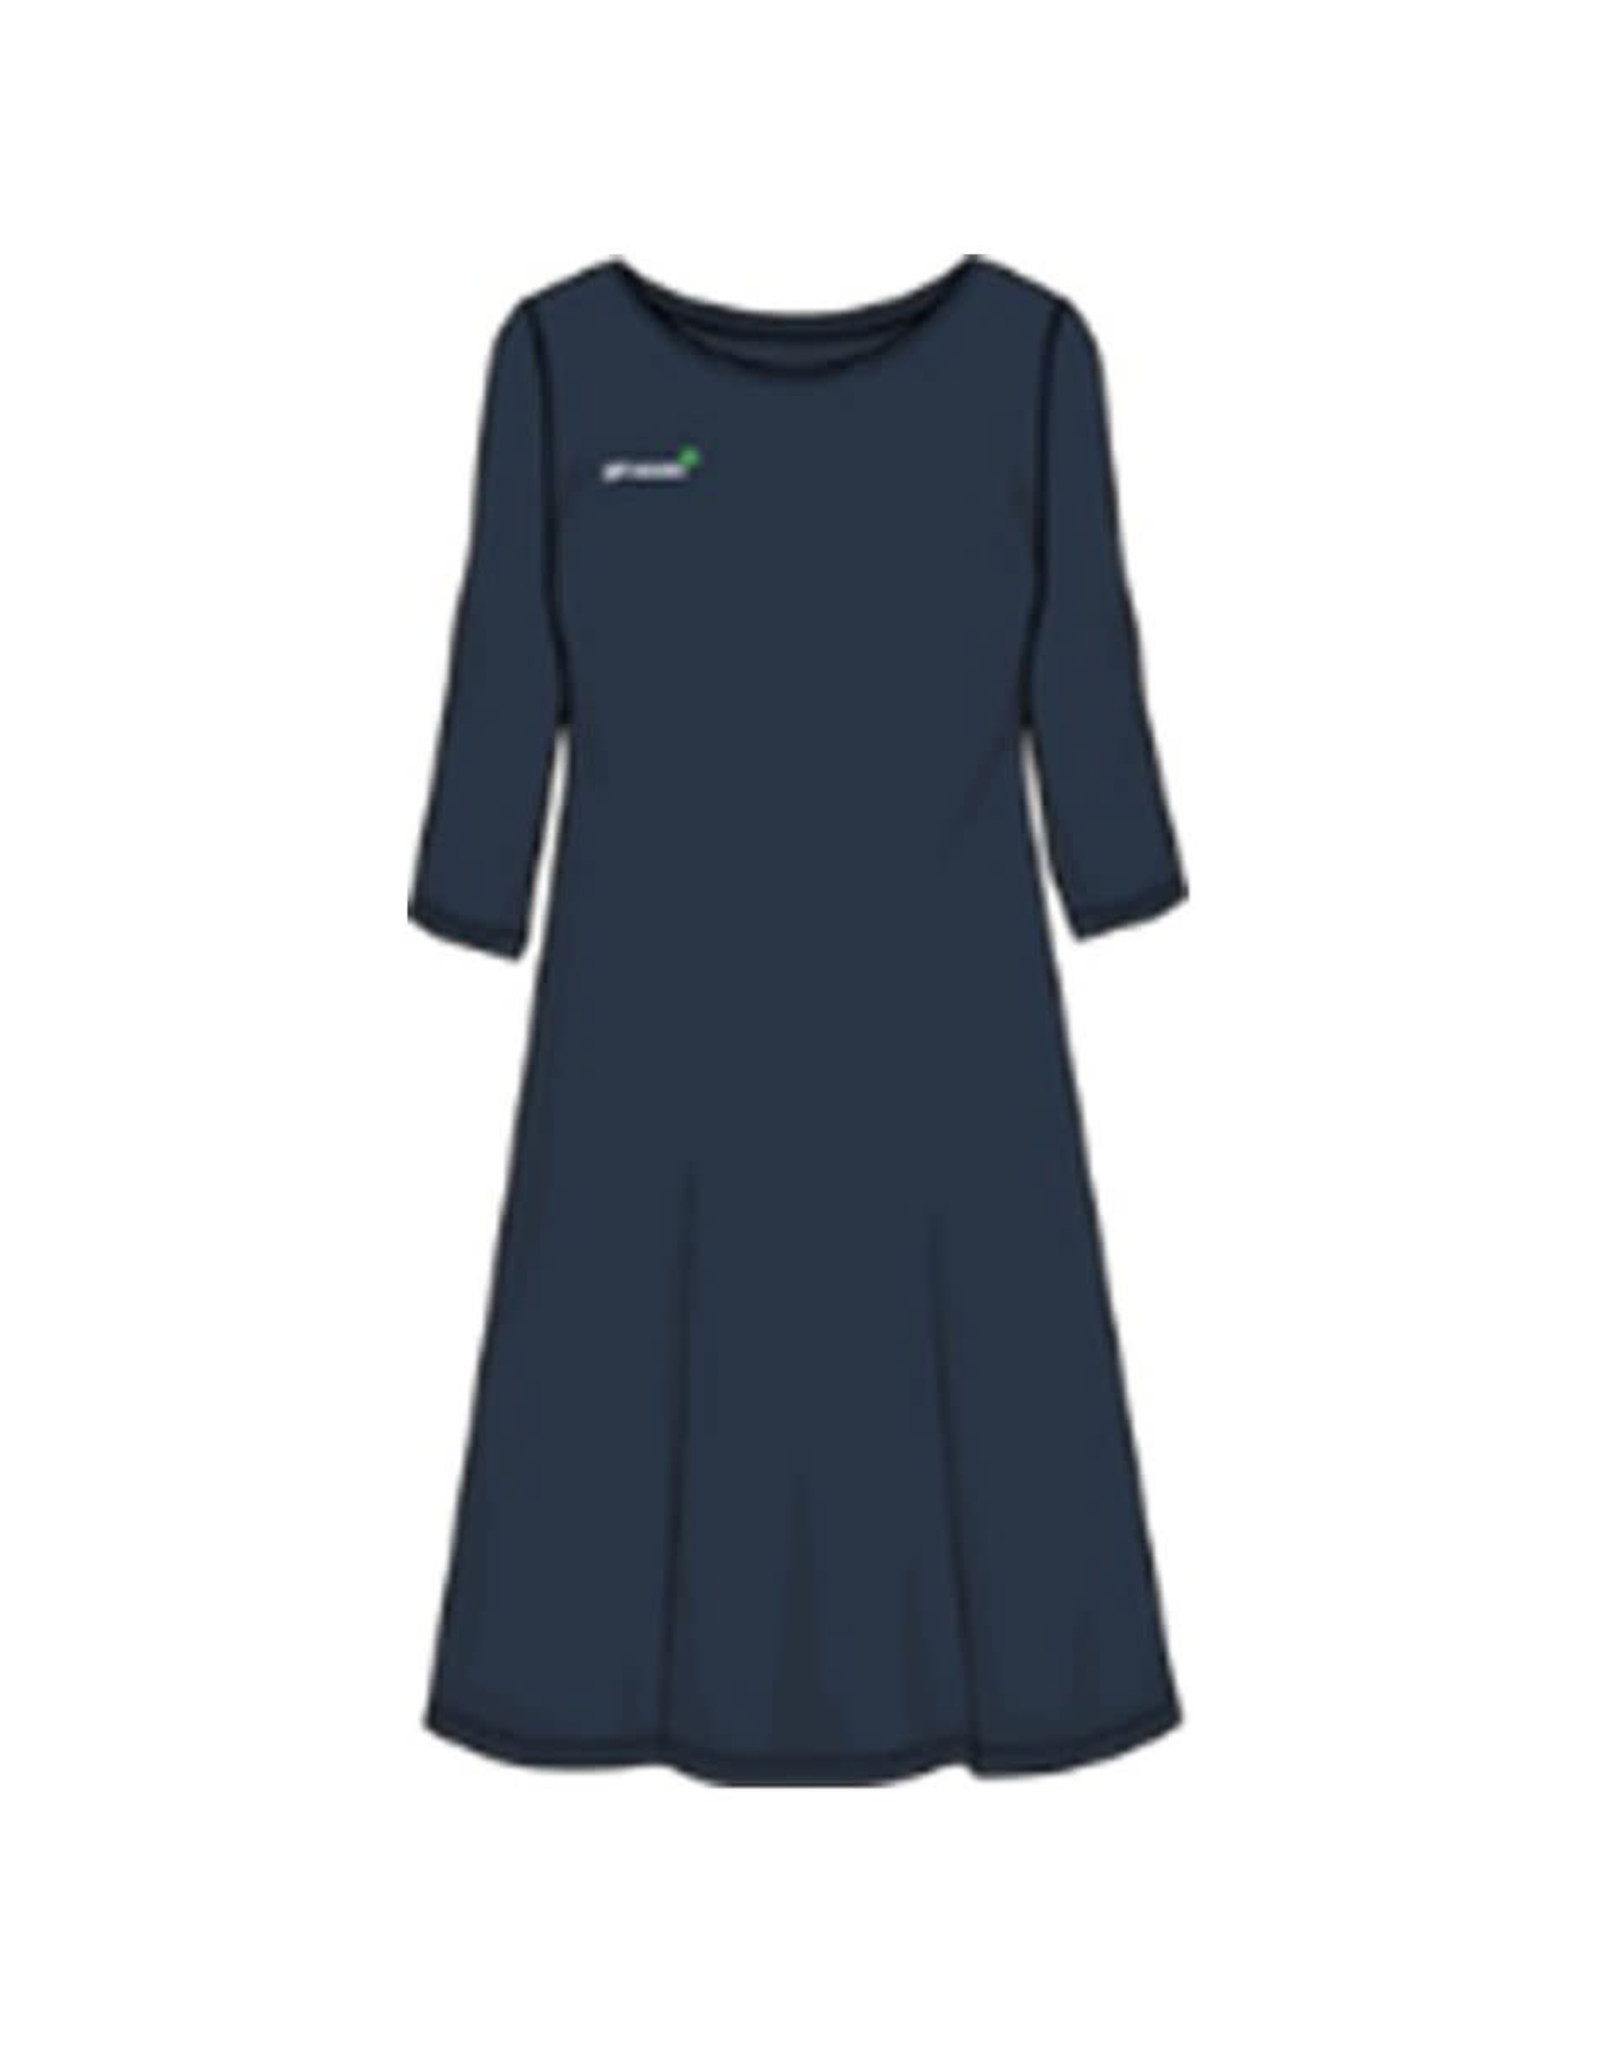 GIRL SCOUTS OF THE USA Navy Three-Quarter Sleeve Knit Dress — Women’s